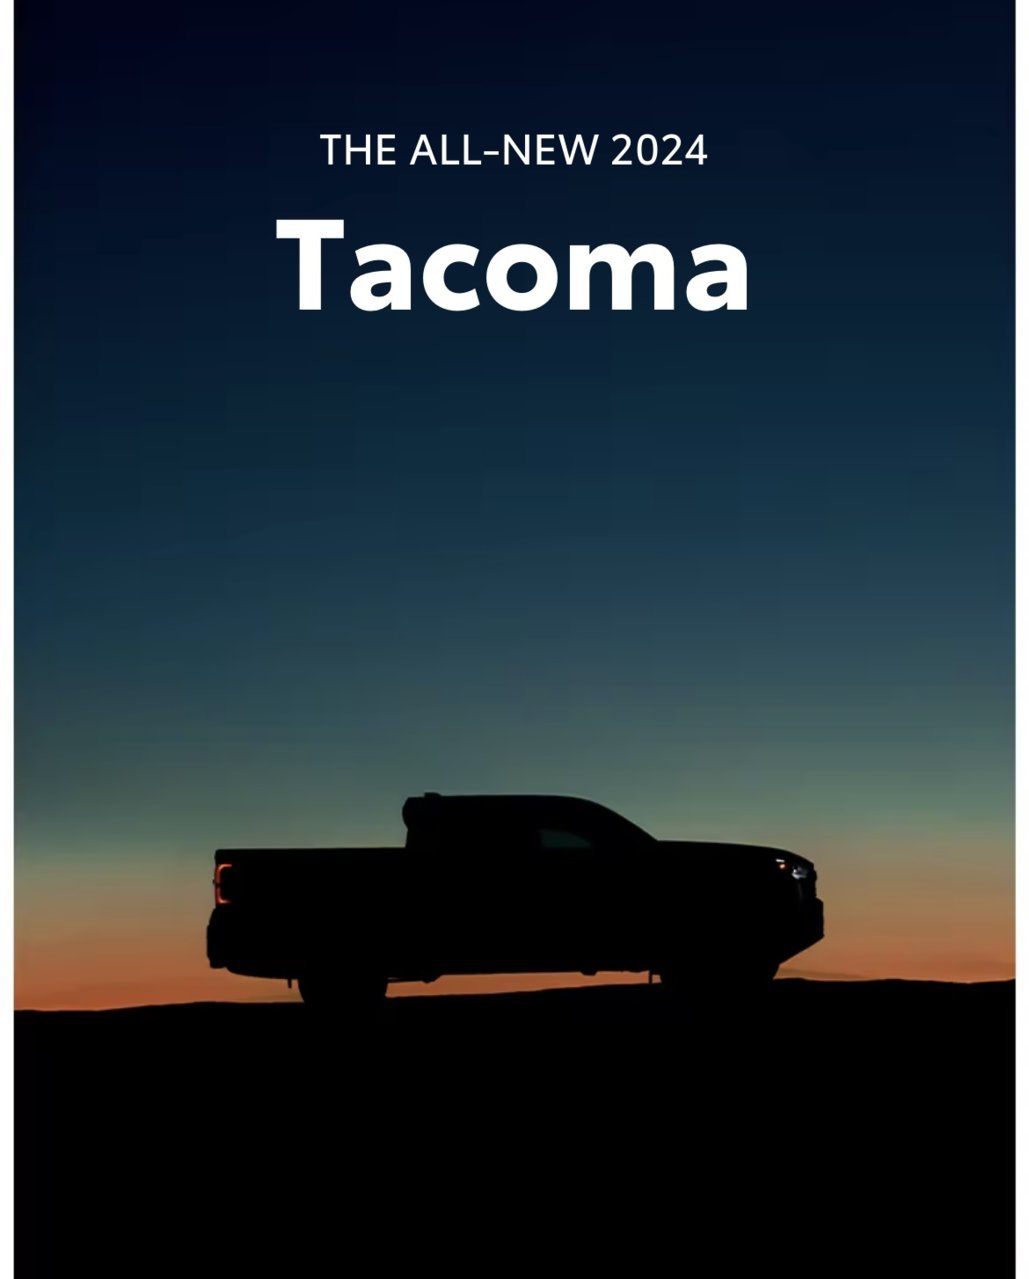 2024 Tacoma 2024 Tacoma Leaked Images Show Headlights, Grille, Hood + Coil Spring Rear Suspension 2024-toyota-tacoma-silhouette-1